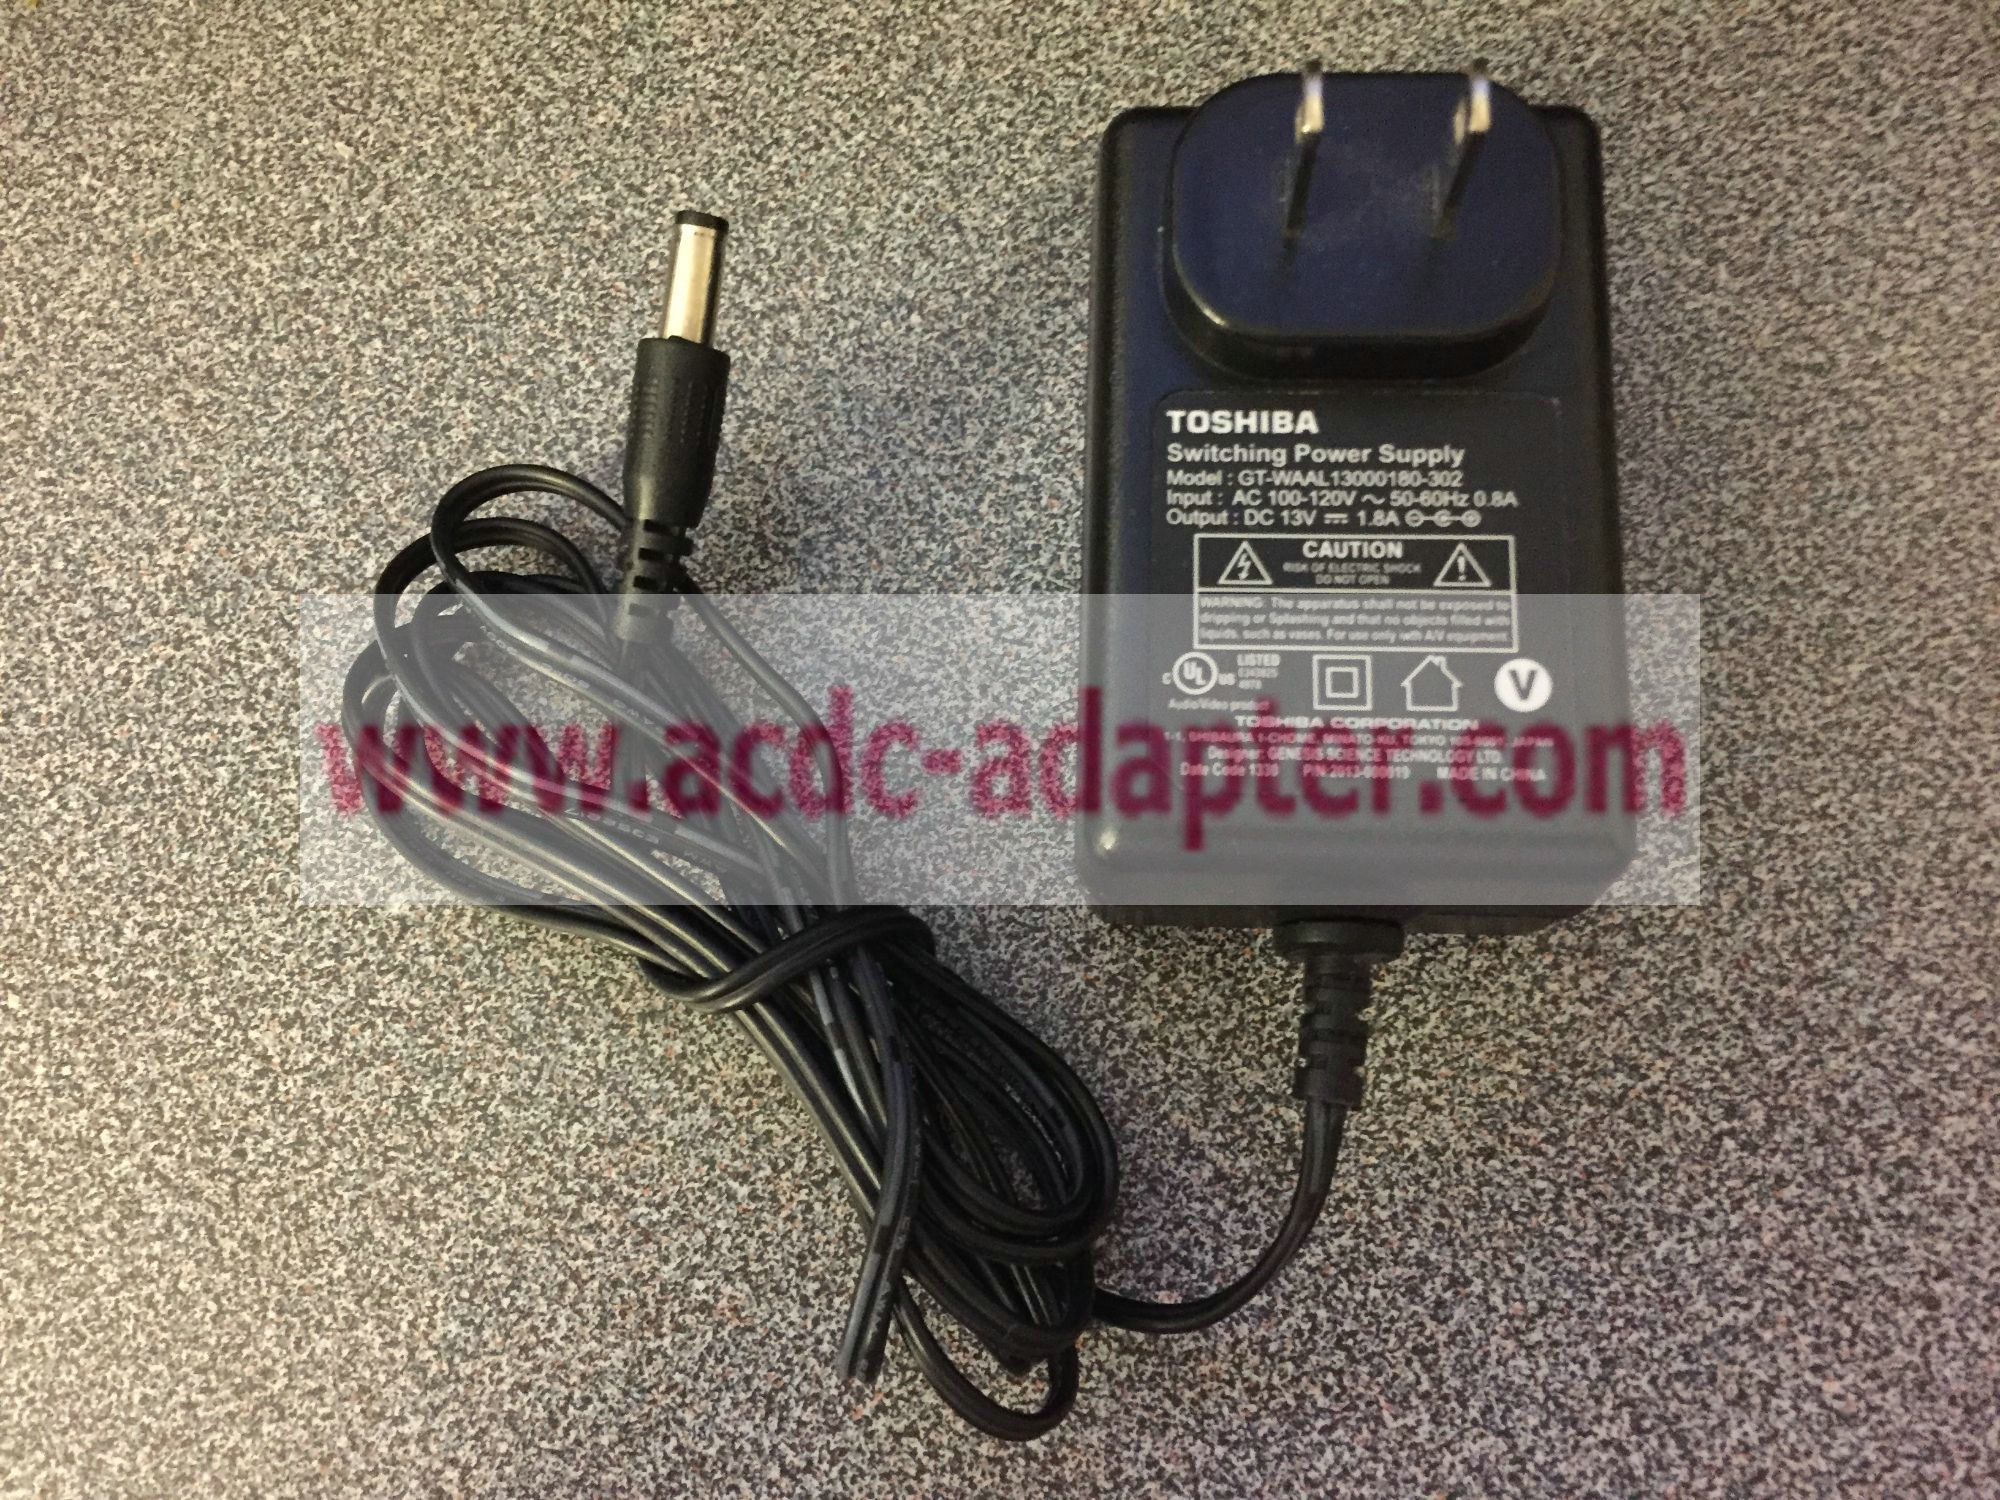 Brand New TOSHIBA GT-WAAL13000180-302 13V 1.8A AC Adapter Switching Power Supply